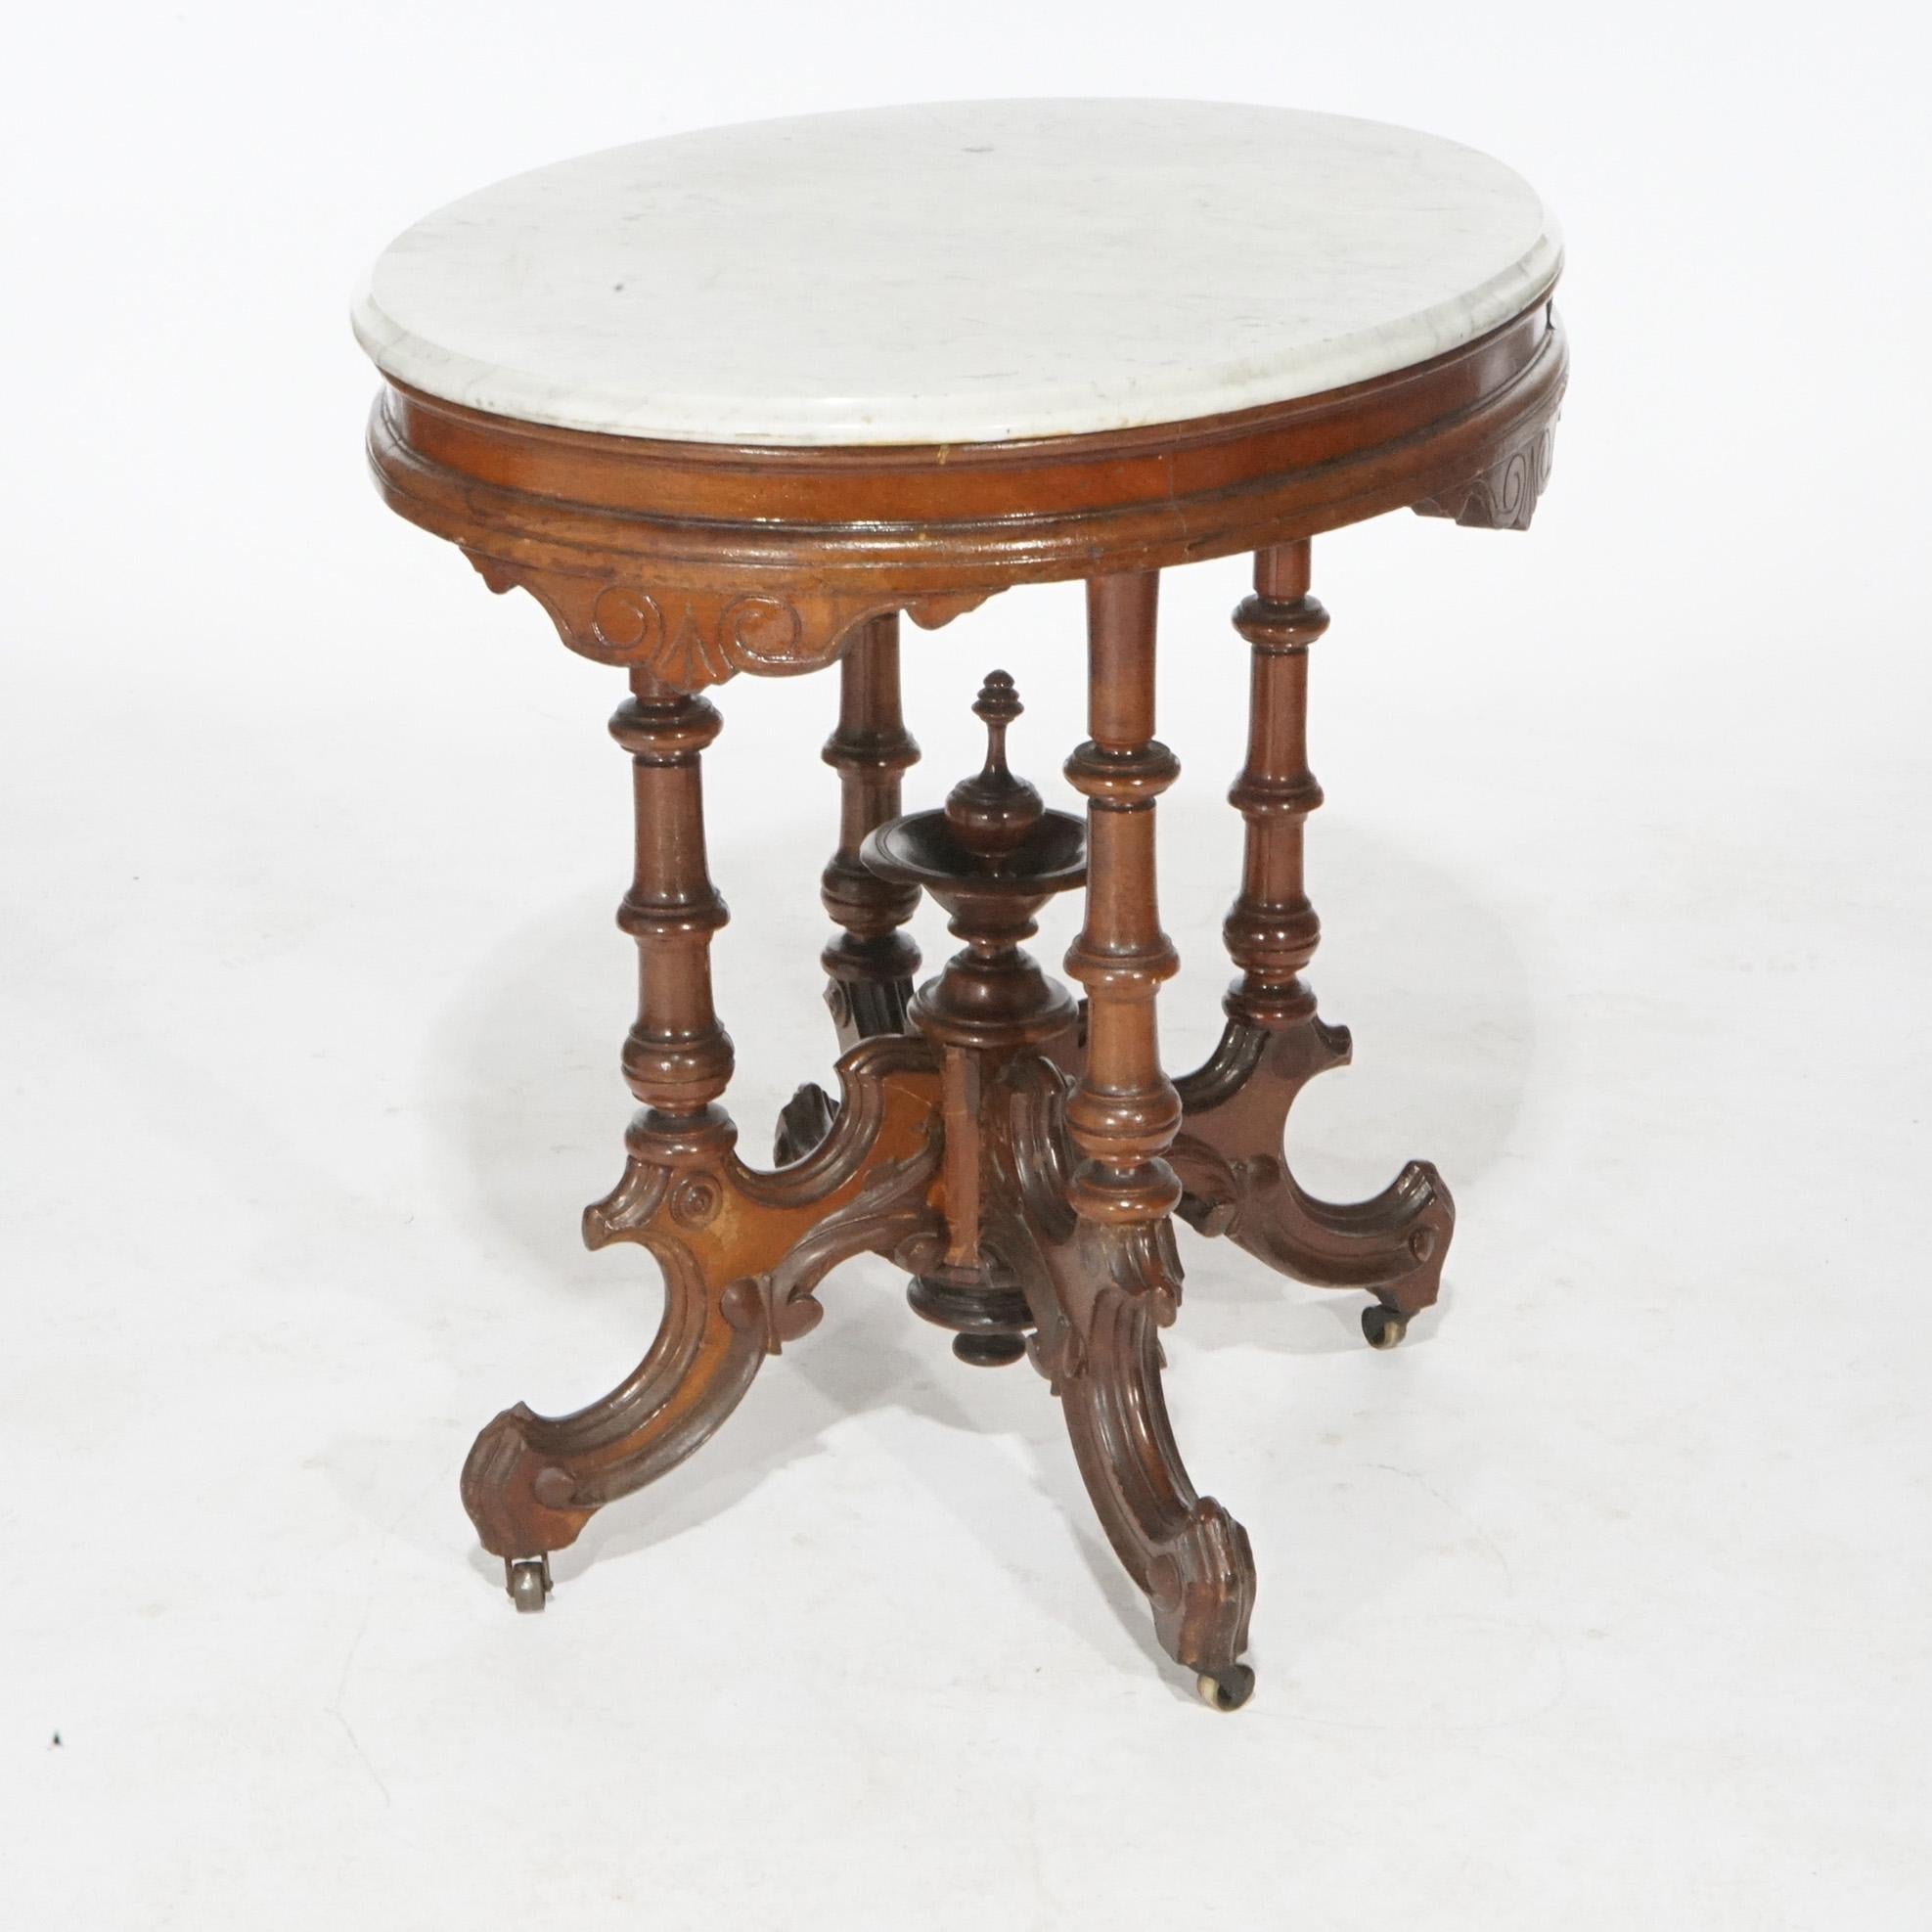 19th Century Antique Renaissance Revival Walnut Oval Marble Top Parlor Table, circa 1890 For Sale